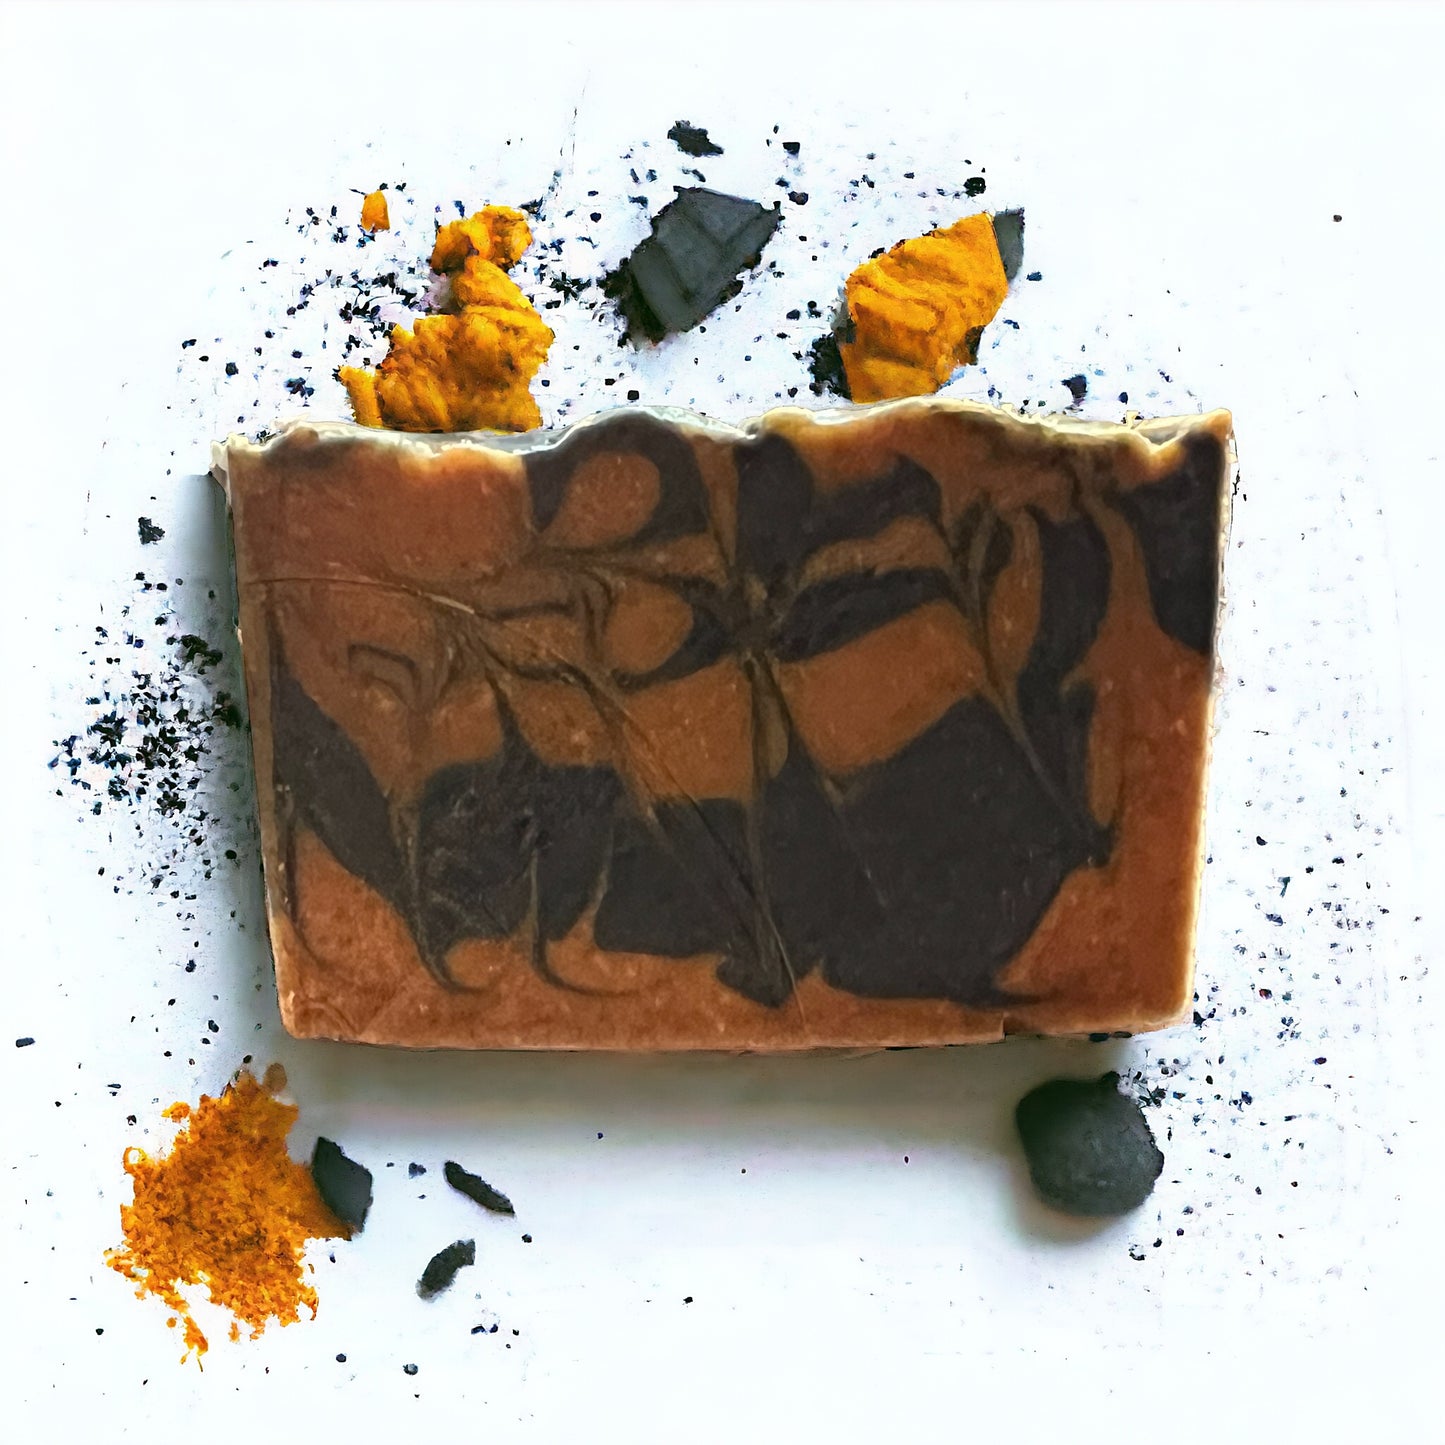 Charcoal and Turmeric Detox Face Soap Gentle Cleansing Formula